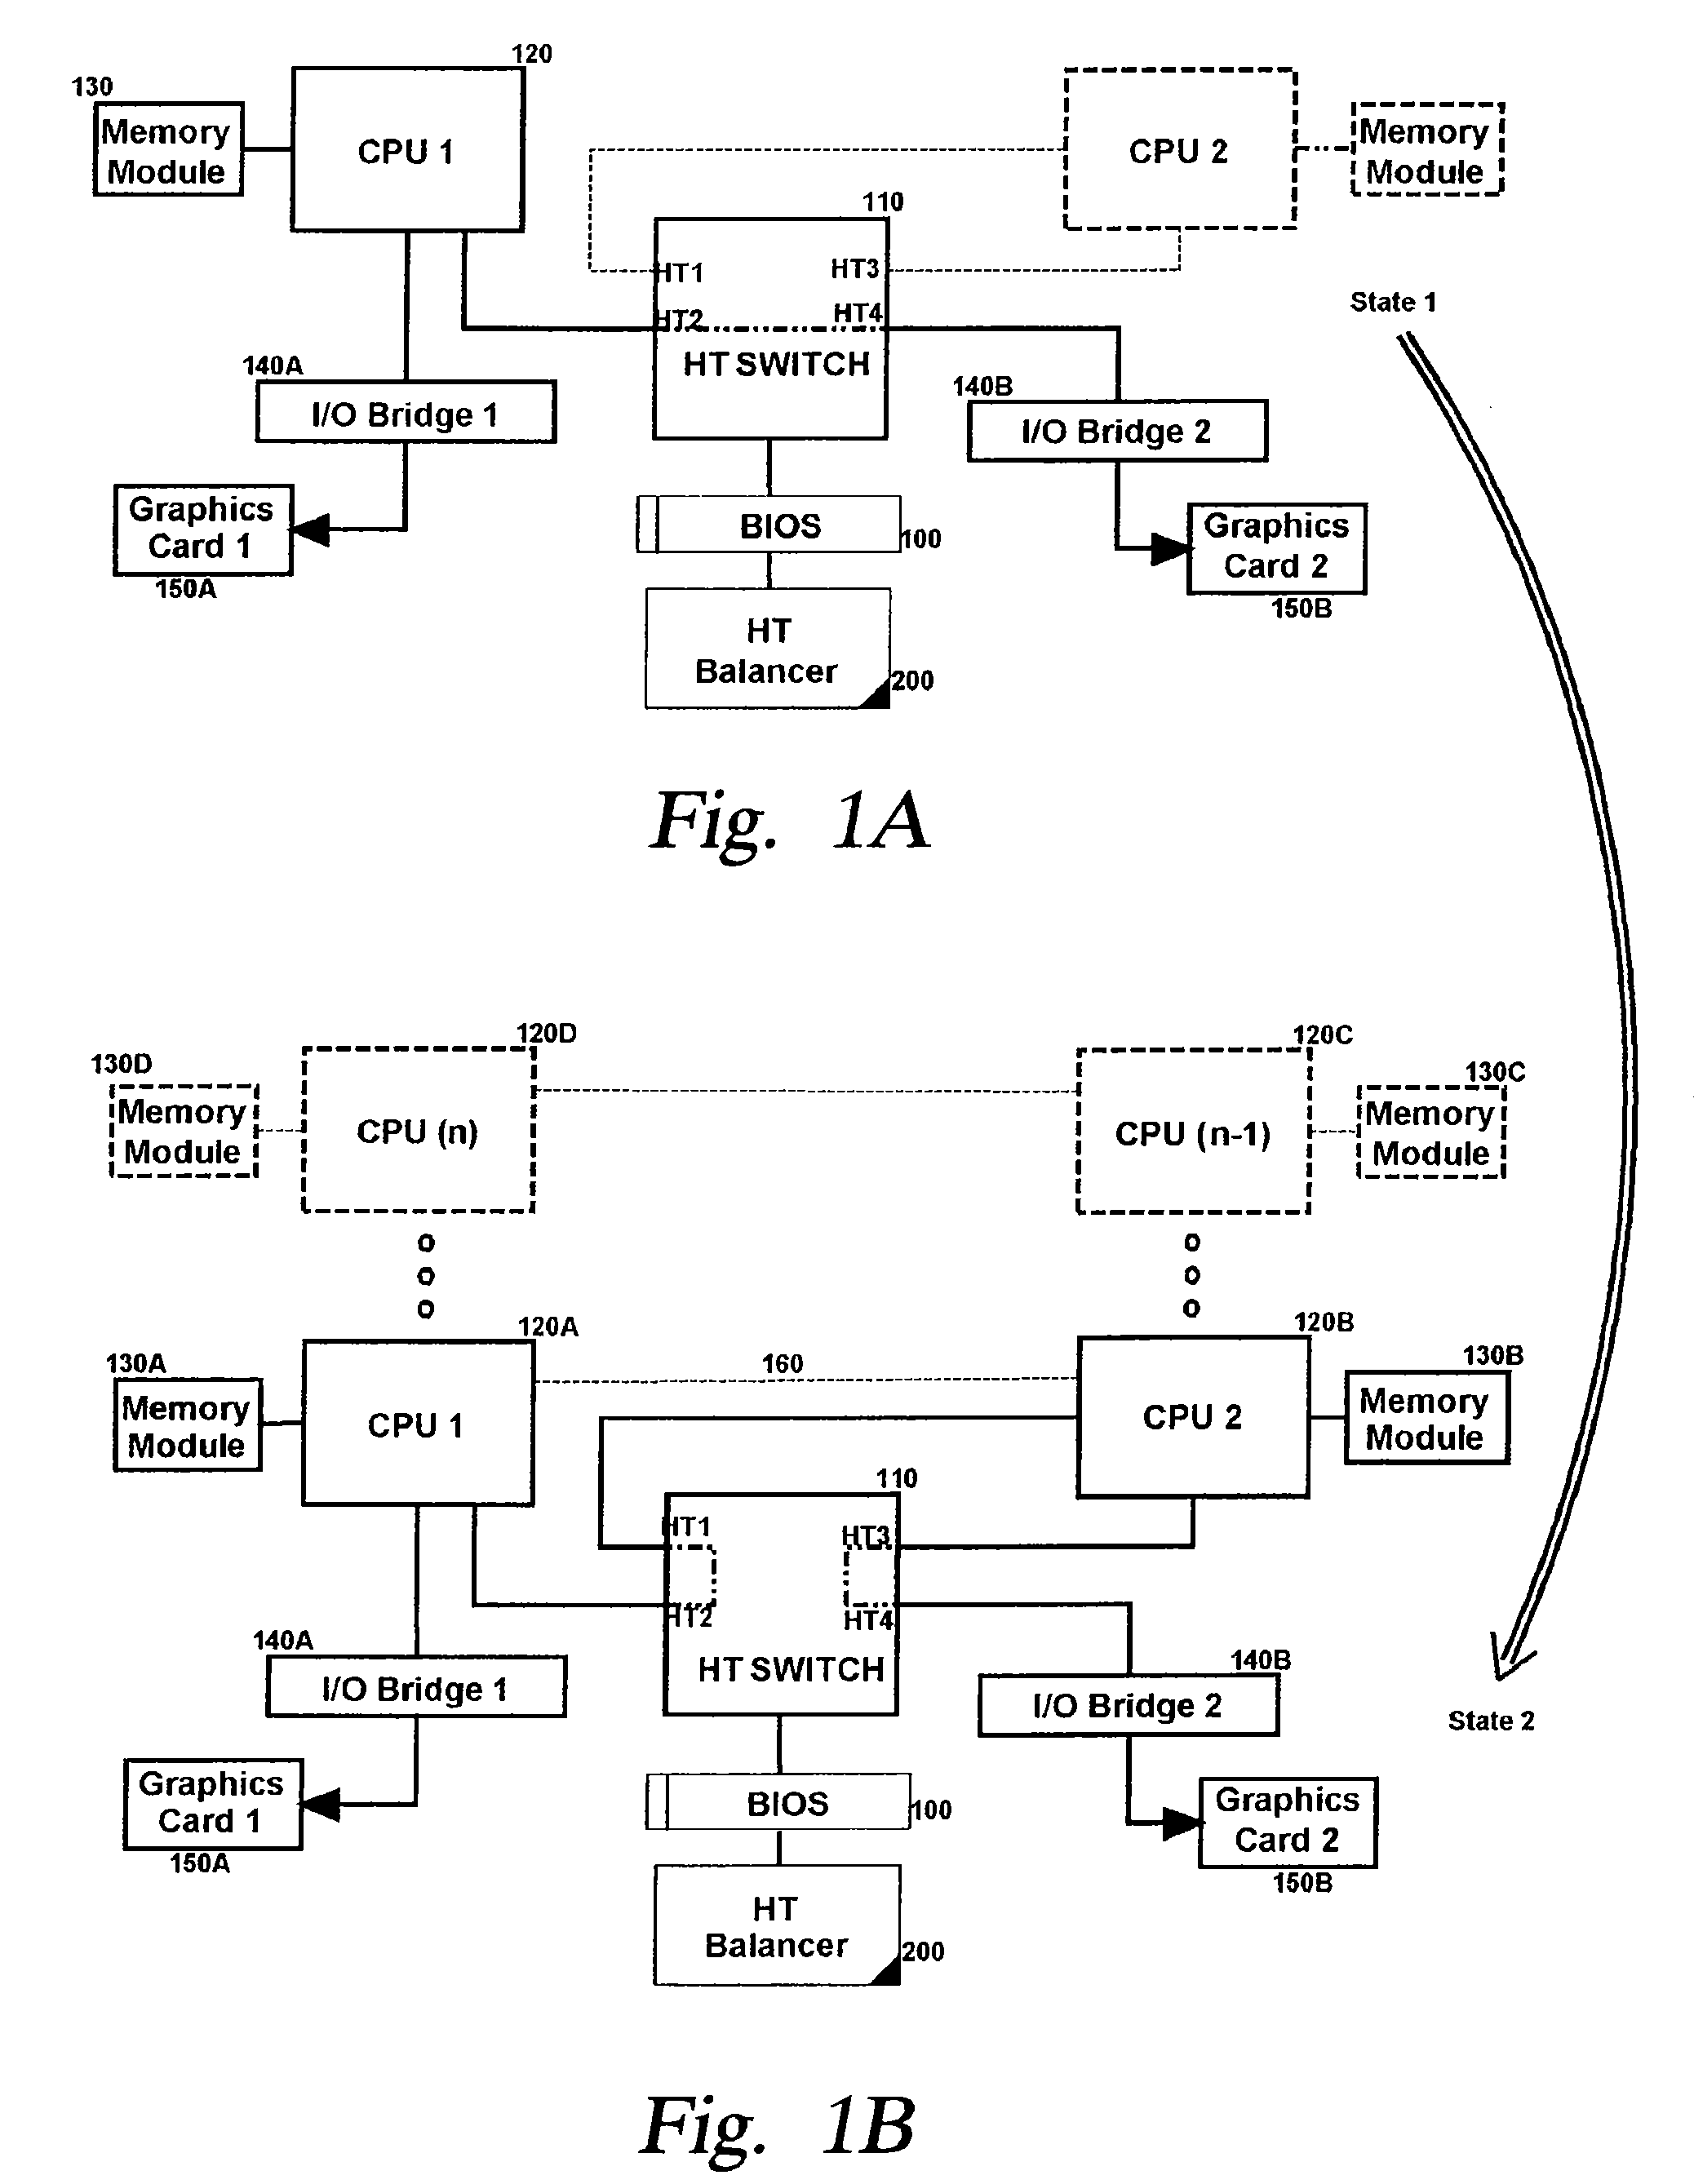 Structure for a flexibly configurable multi central processing unit (CPU) supported hypertransport switching